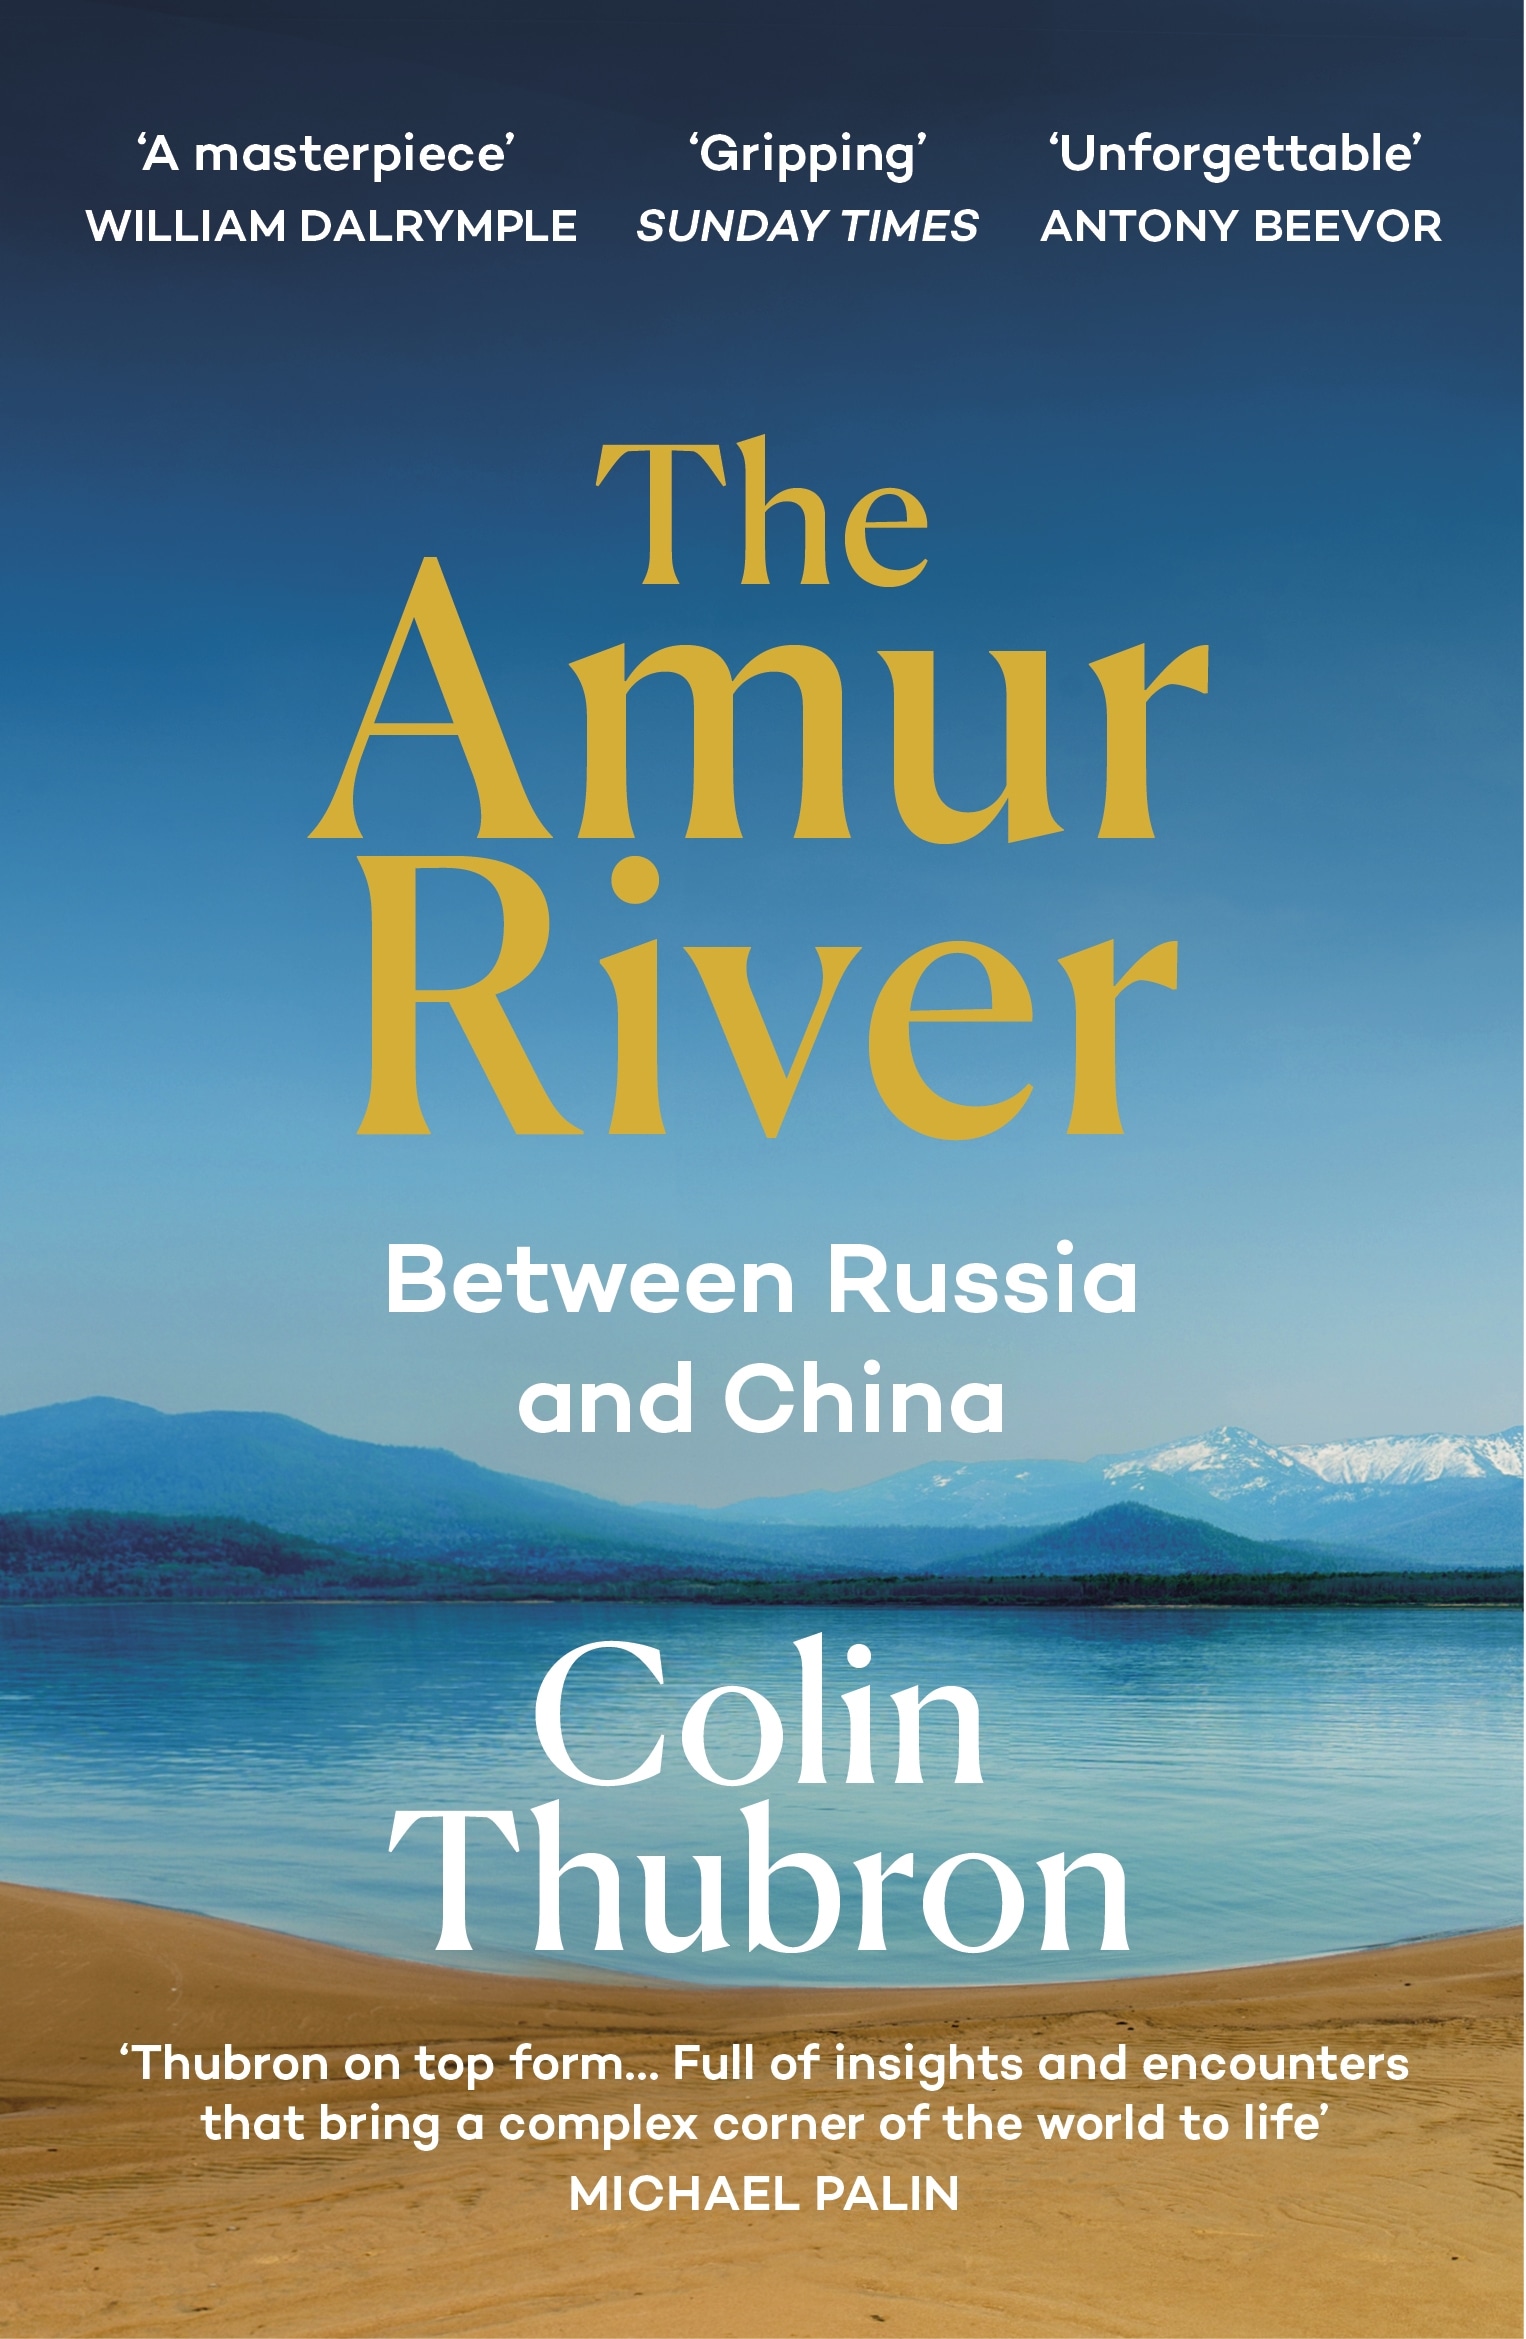 Book “The Amur River” by Colin Thubron — September 15, 2022